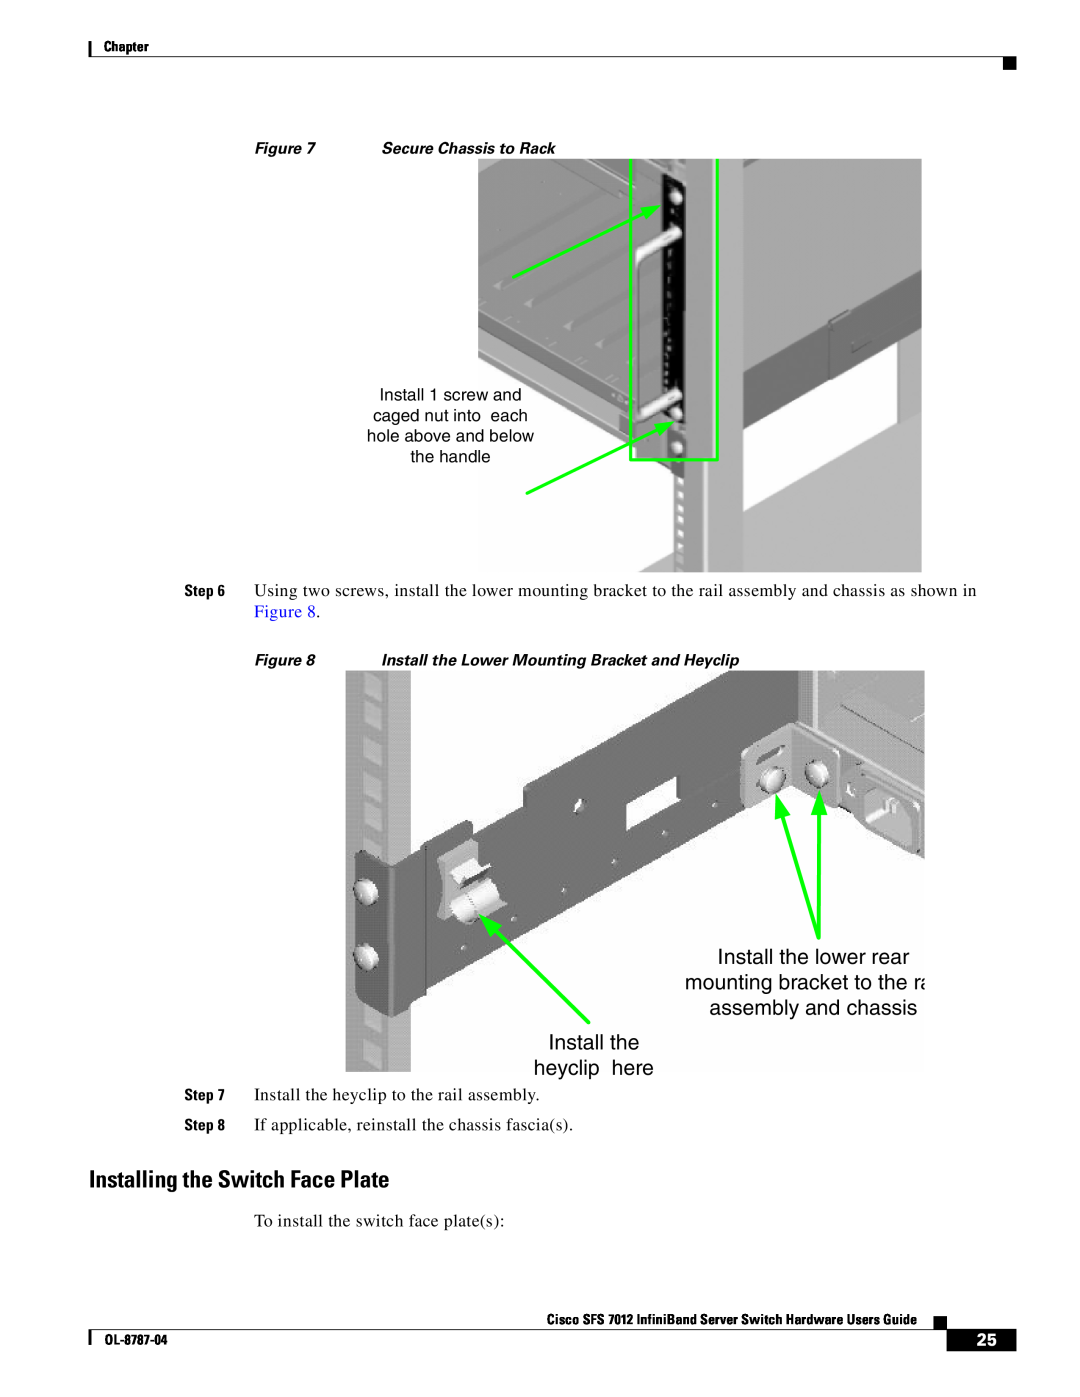 Cisco Systems SFS 7012 manual Installing the Switch Face Plate, Install the heyclip here 